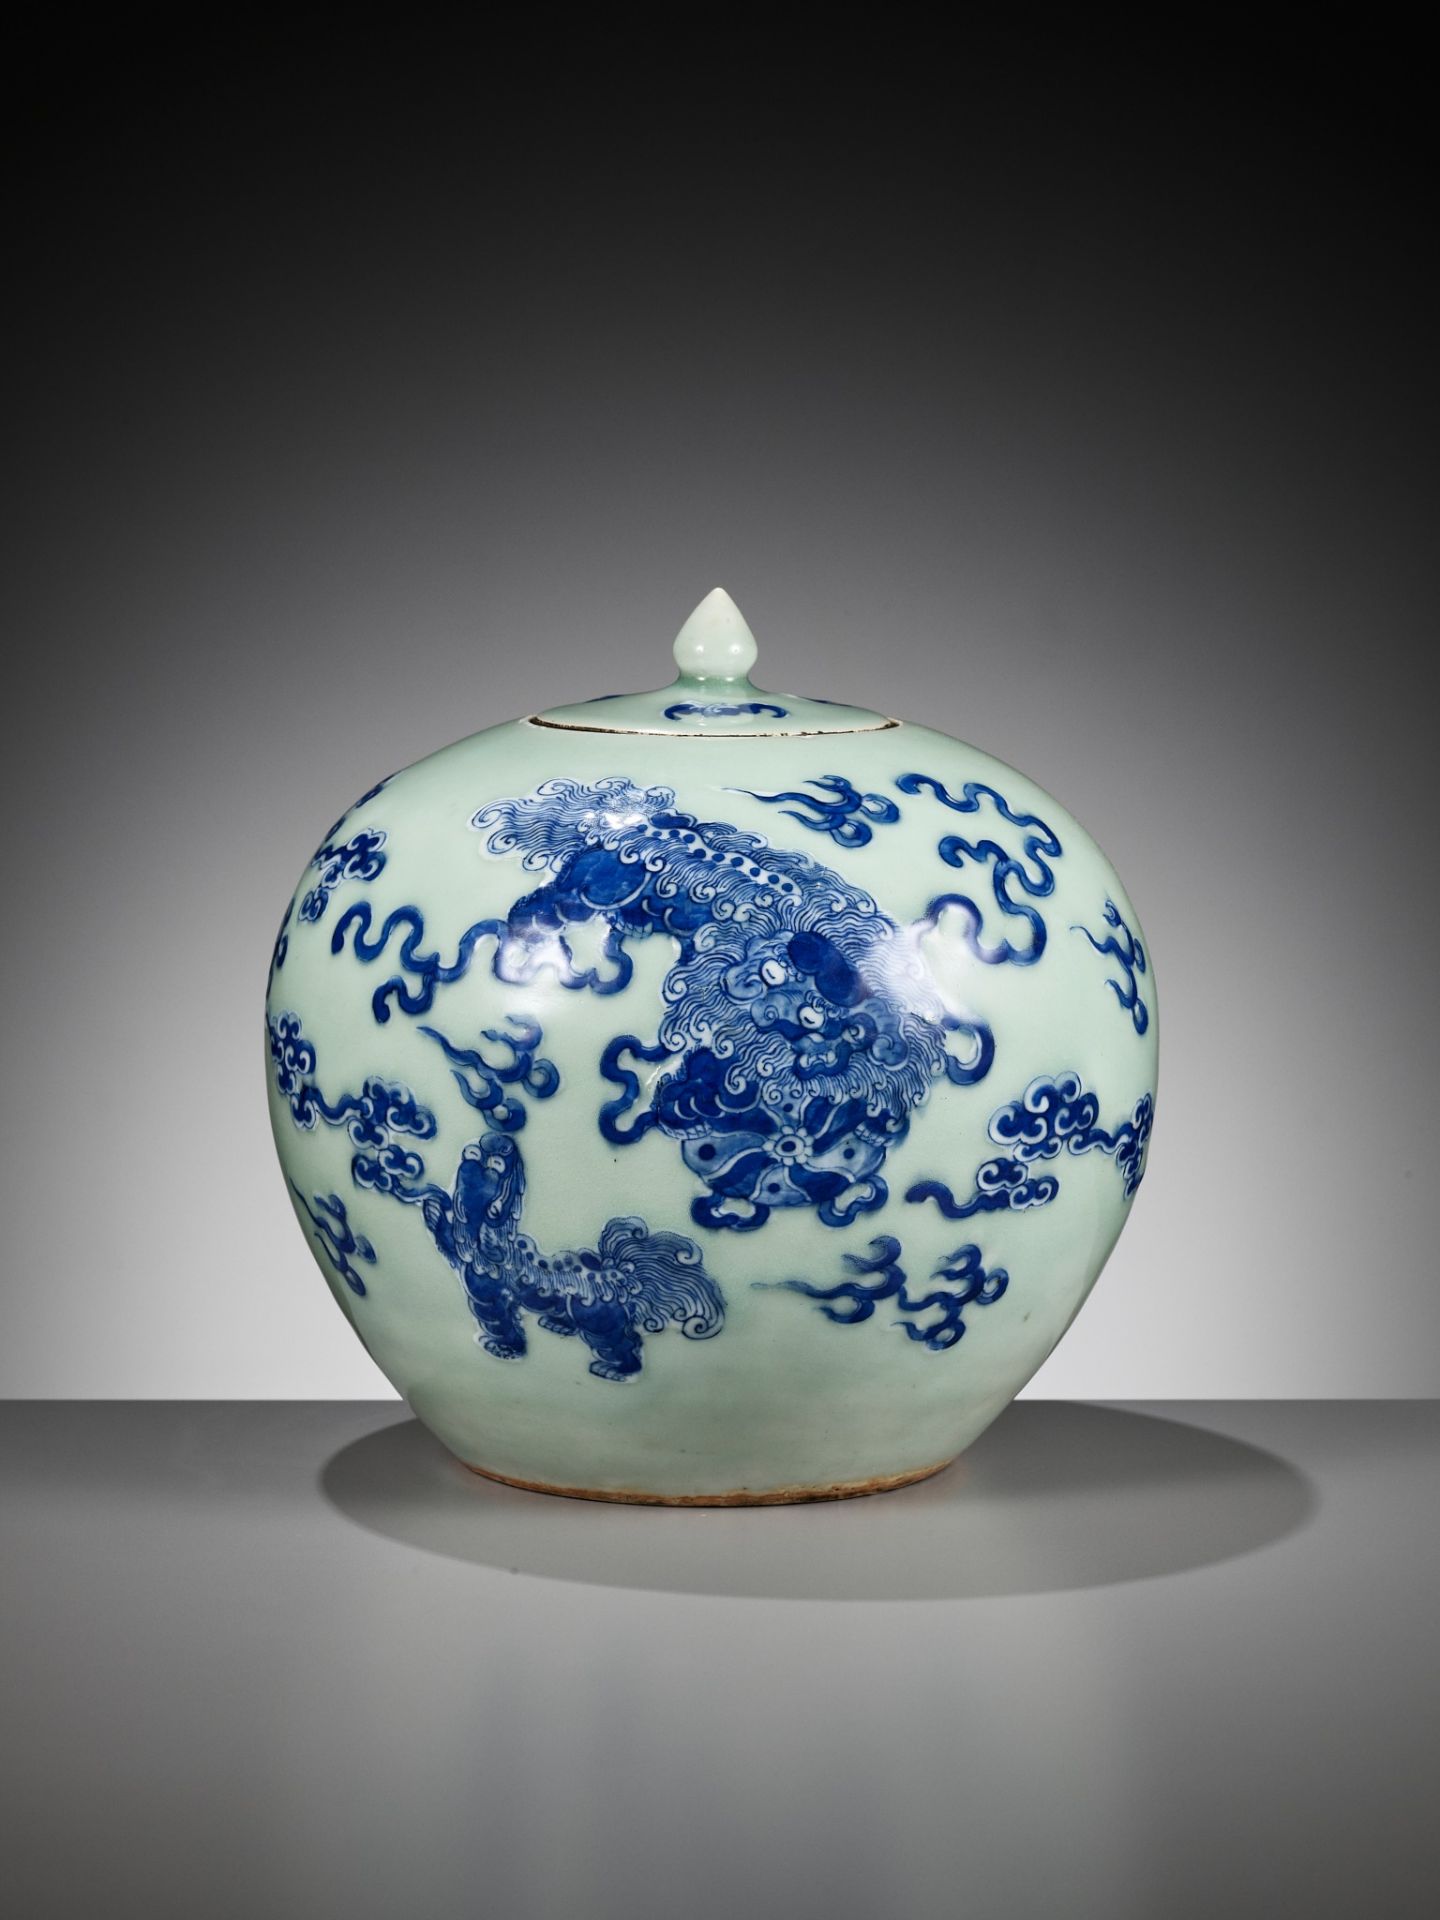 A CELADON-GROUND AND UNDERGLAZE-BLUE JAR AND COVER, CHINA, 19TH - EARLY 20TH CENTURY - Image 7 of 10